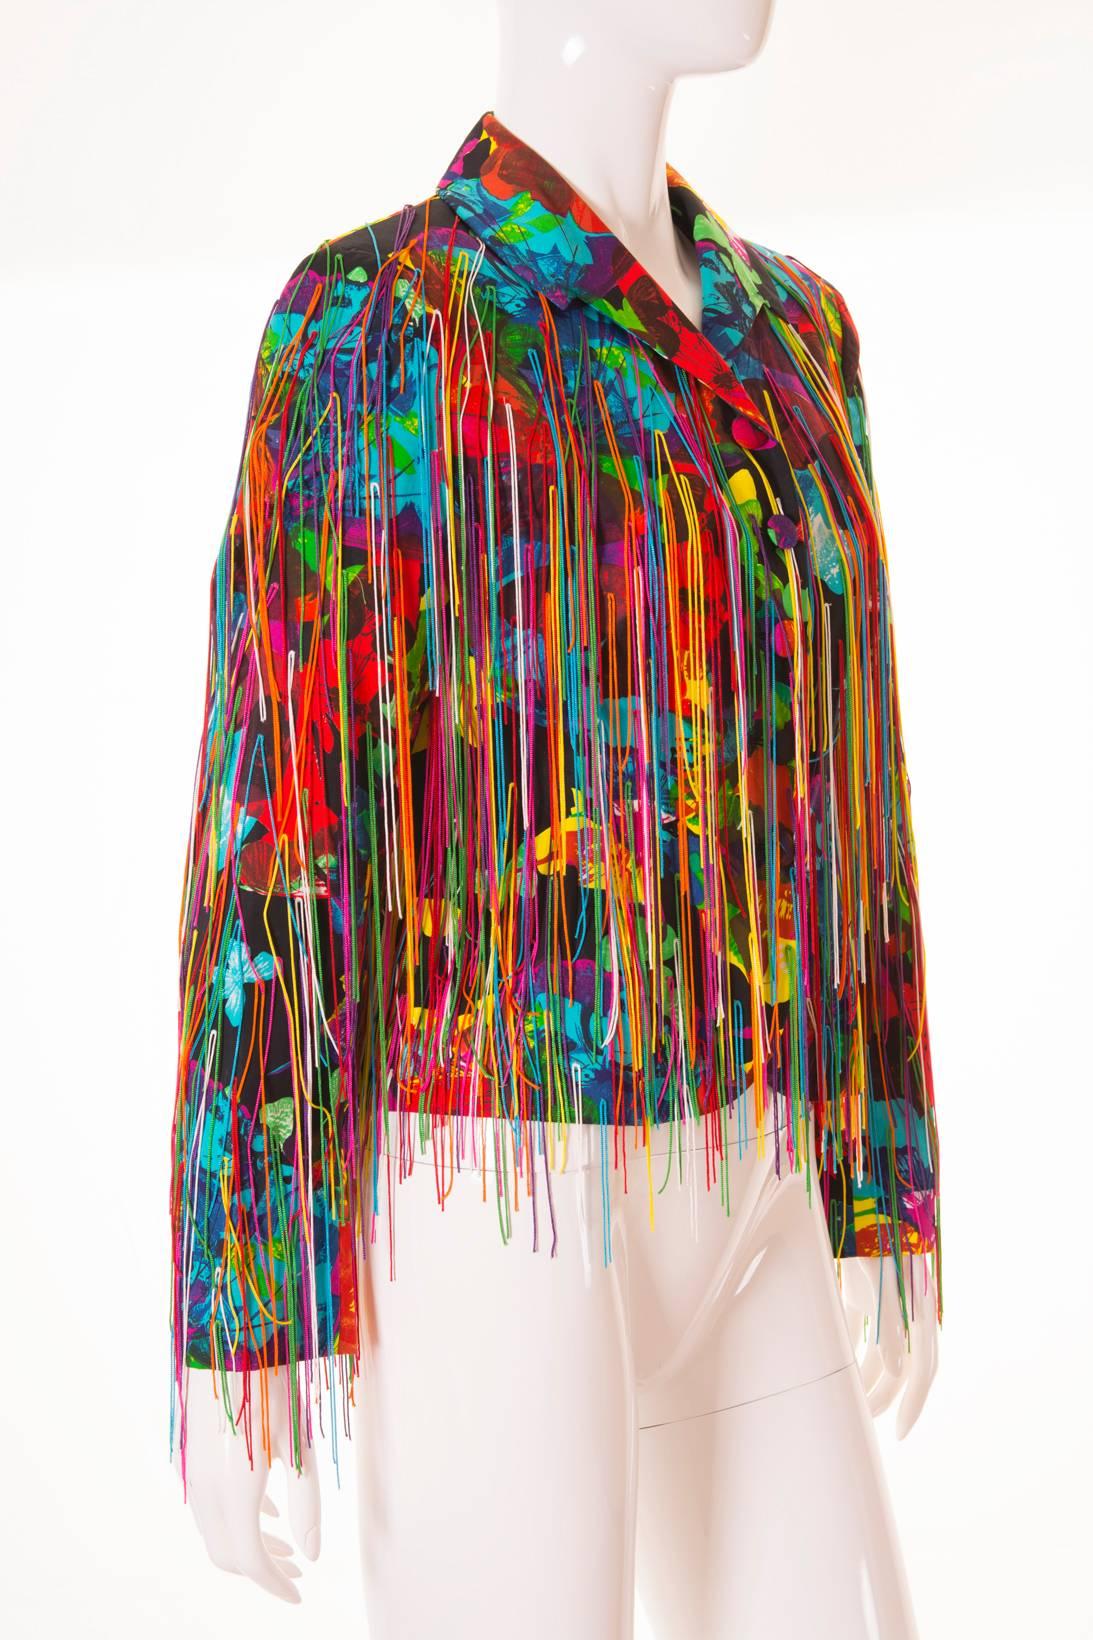 This jacket by Moschino Couture is absolutely breathtaking.  The piece, designed by Franco Moschino, features a vibrant rainbow floral all over print and is covered in multicoloured fringing.  We love the way this garment moves when worn.  Single